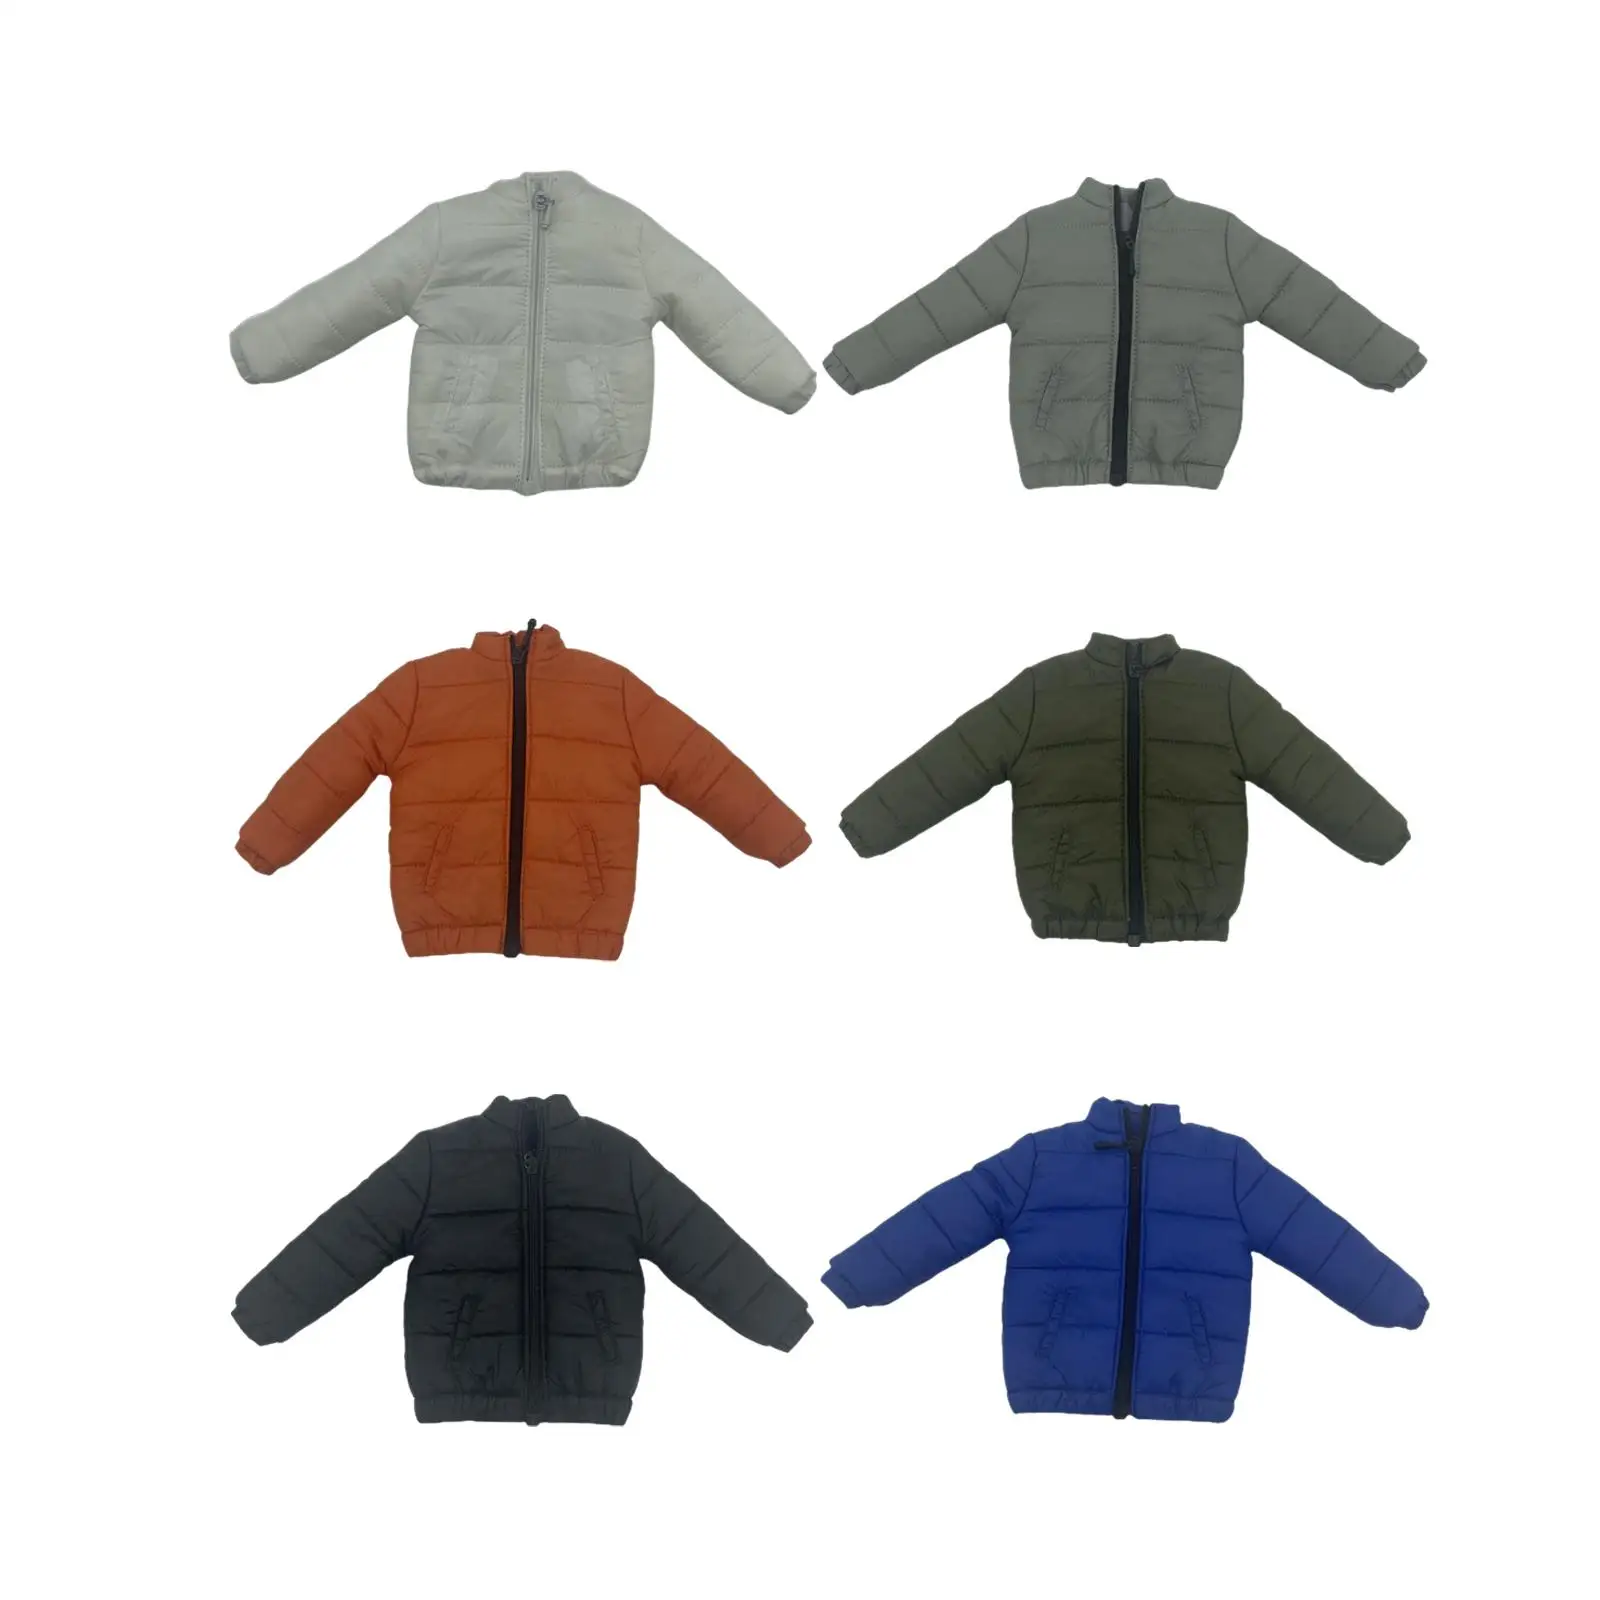 Fashion 1/6 Scale Doll Down Jacket Figure Doll Clothes for 12 inch Doll Model Men Figures Accs